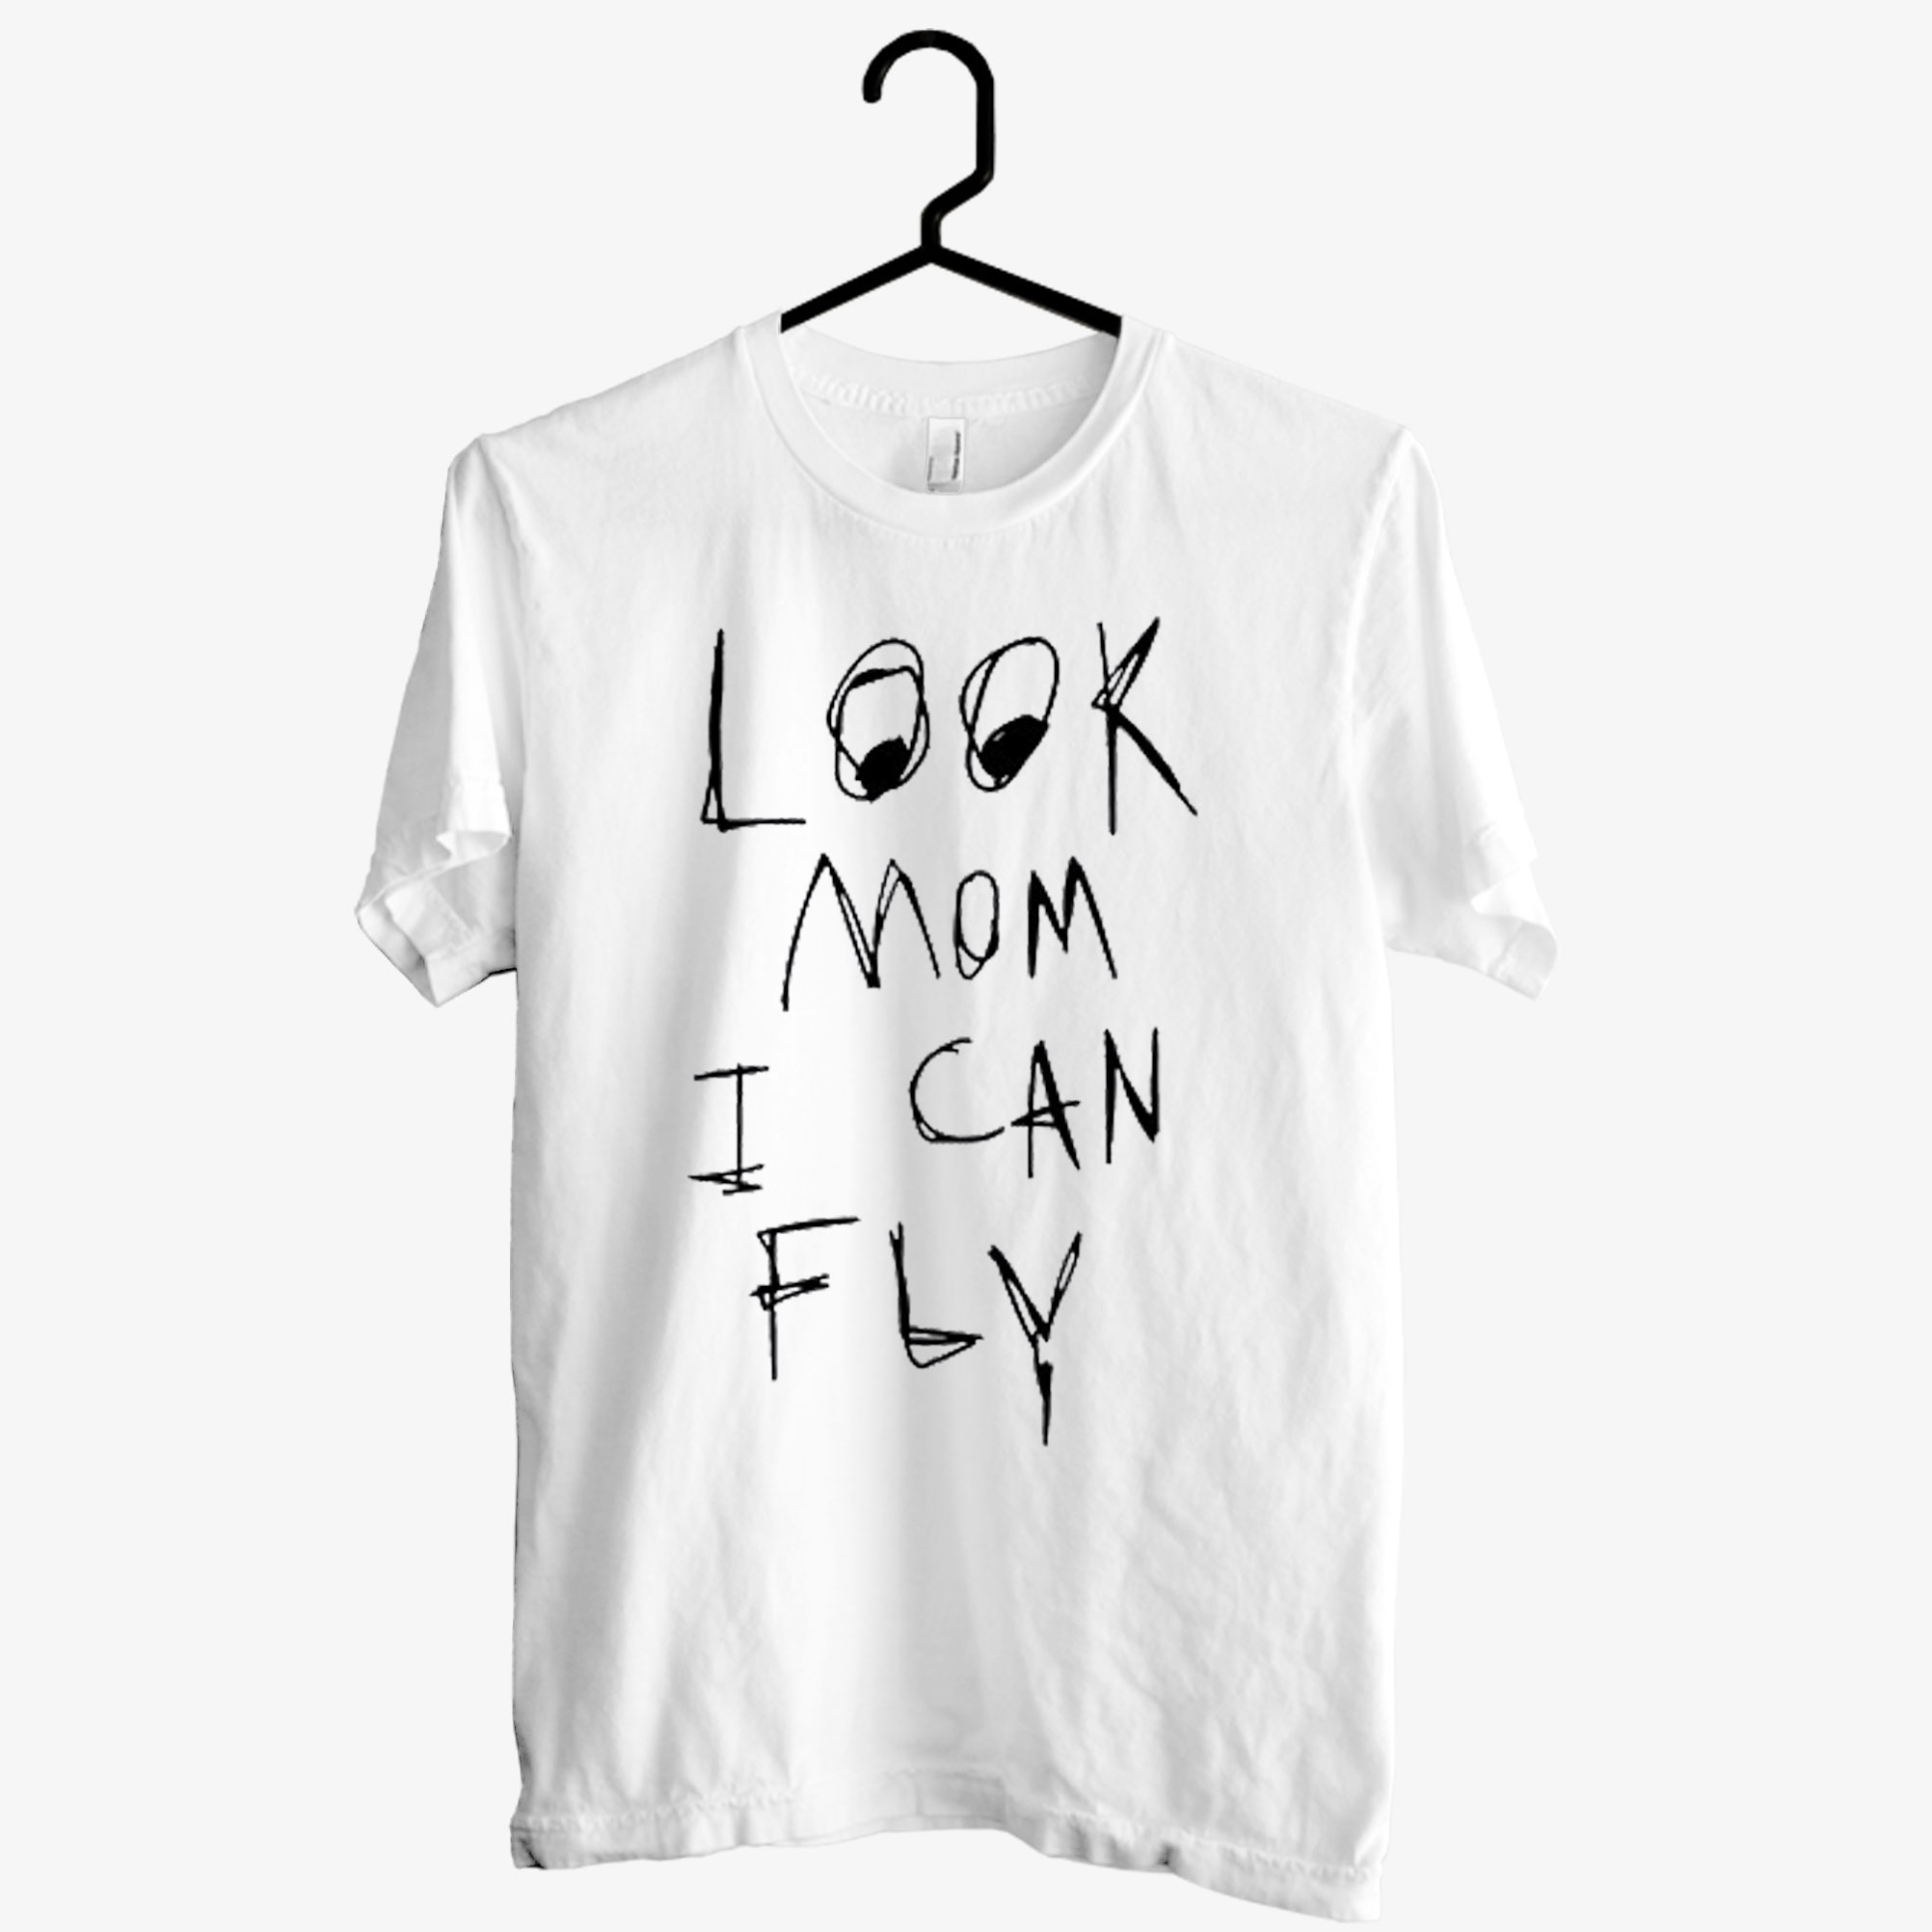 Look Mom I Can Fly Astroworld T shirt